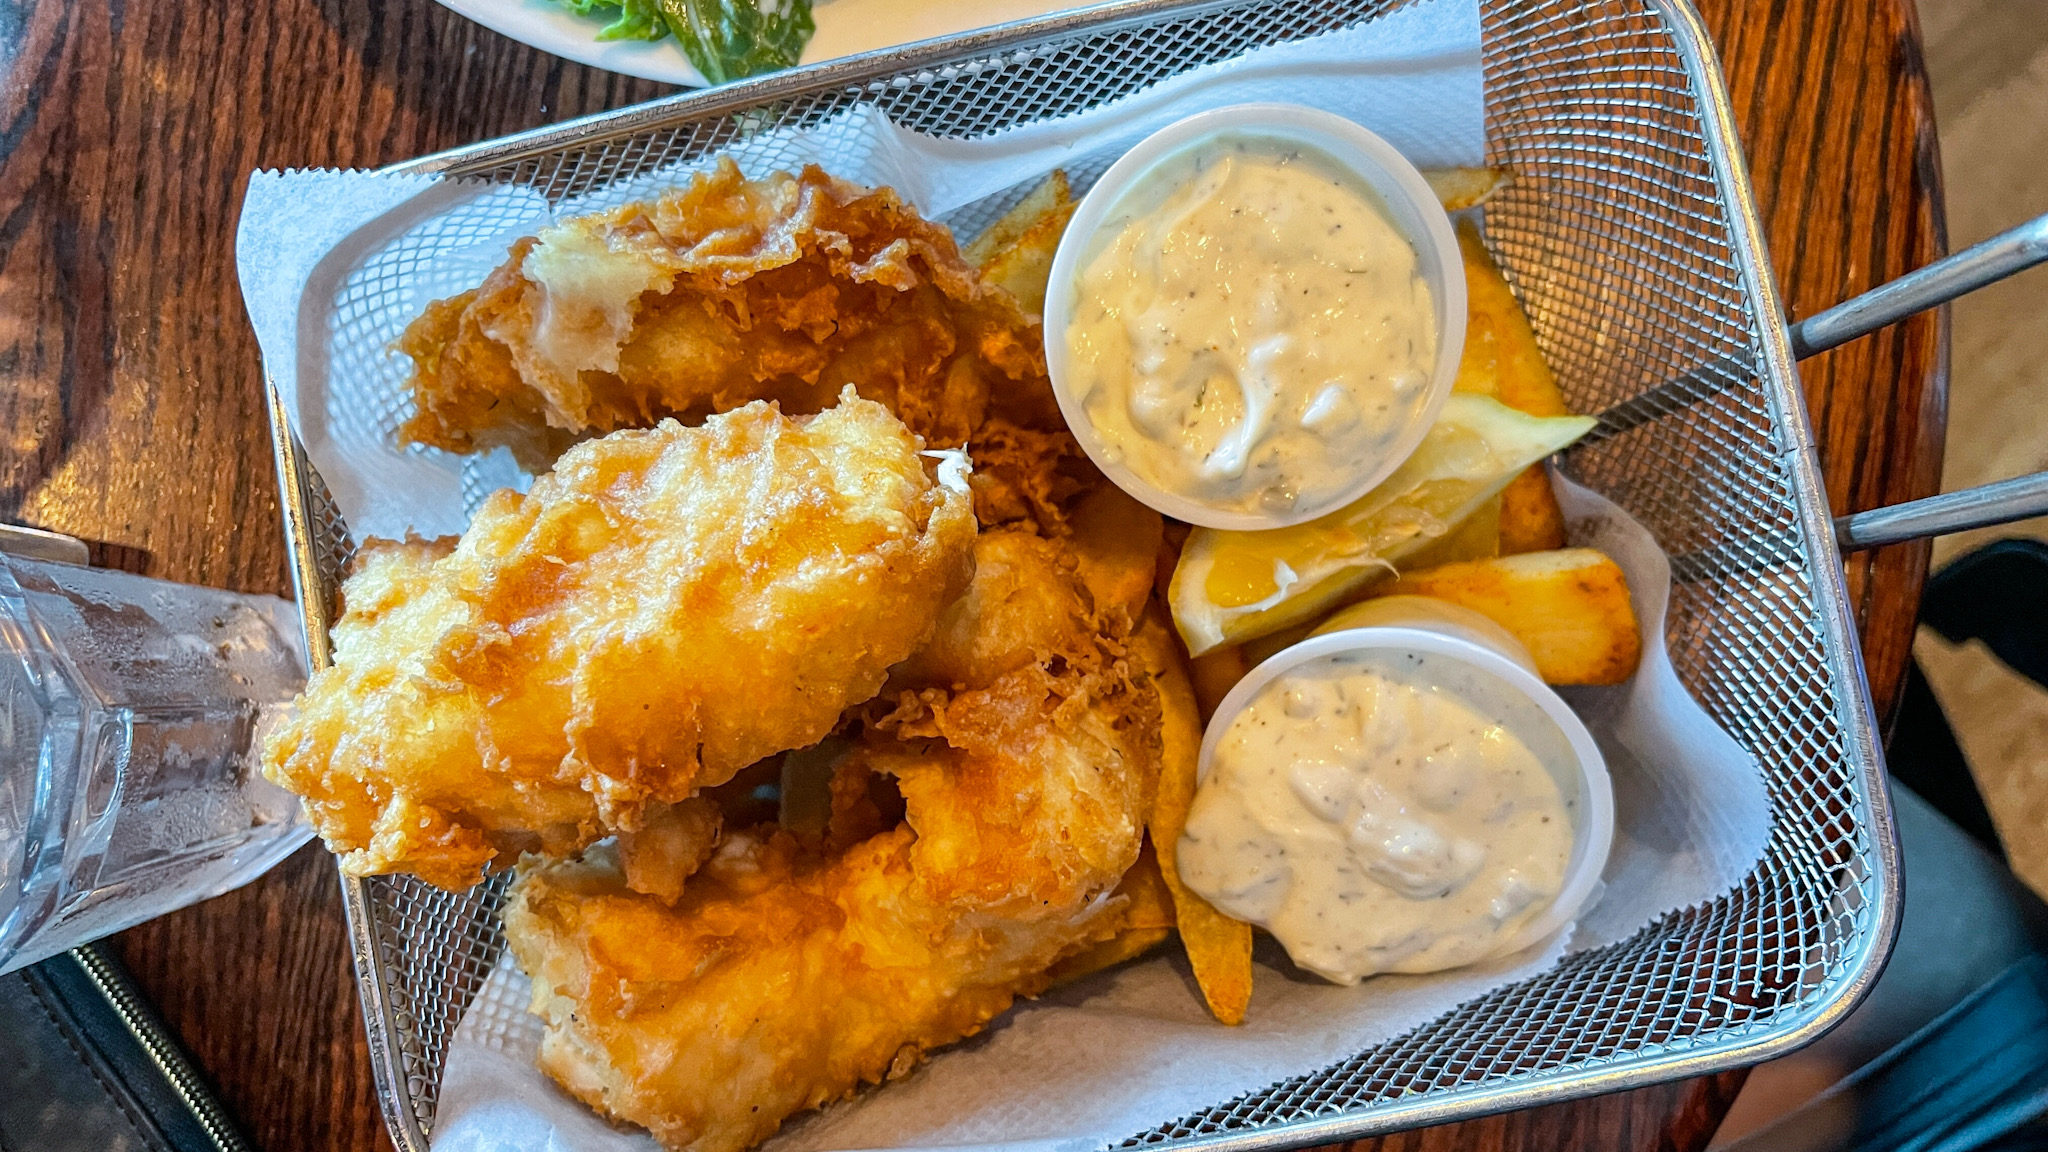 A baskets of fish and chips from The Hanger in Juneau